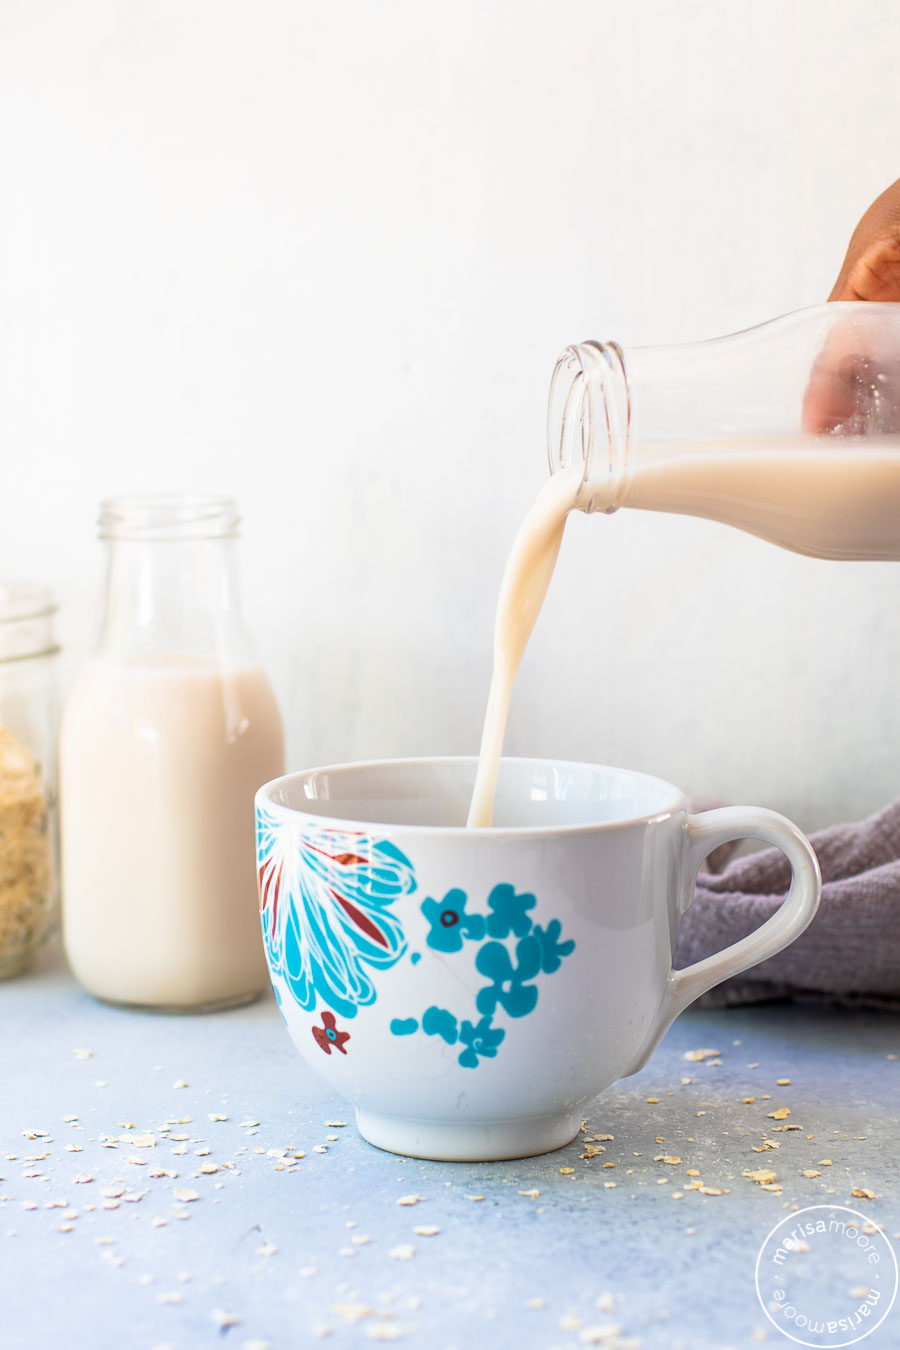 Pouring oat milk into a cup